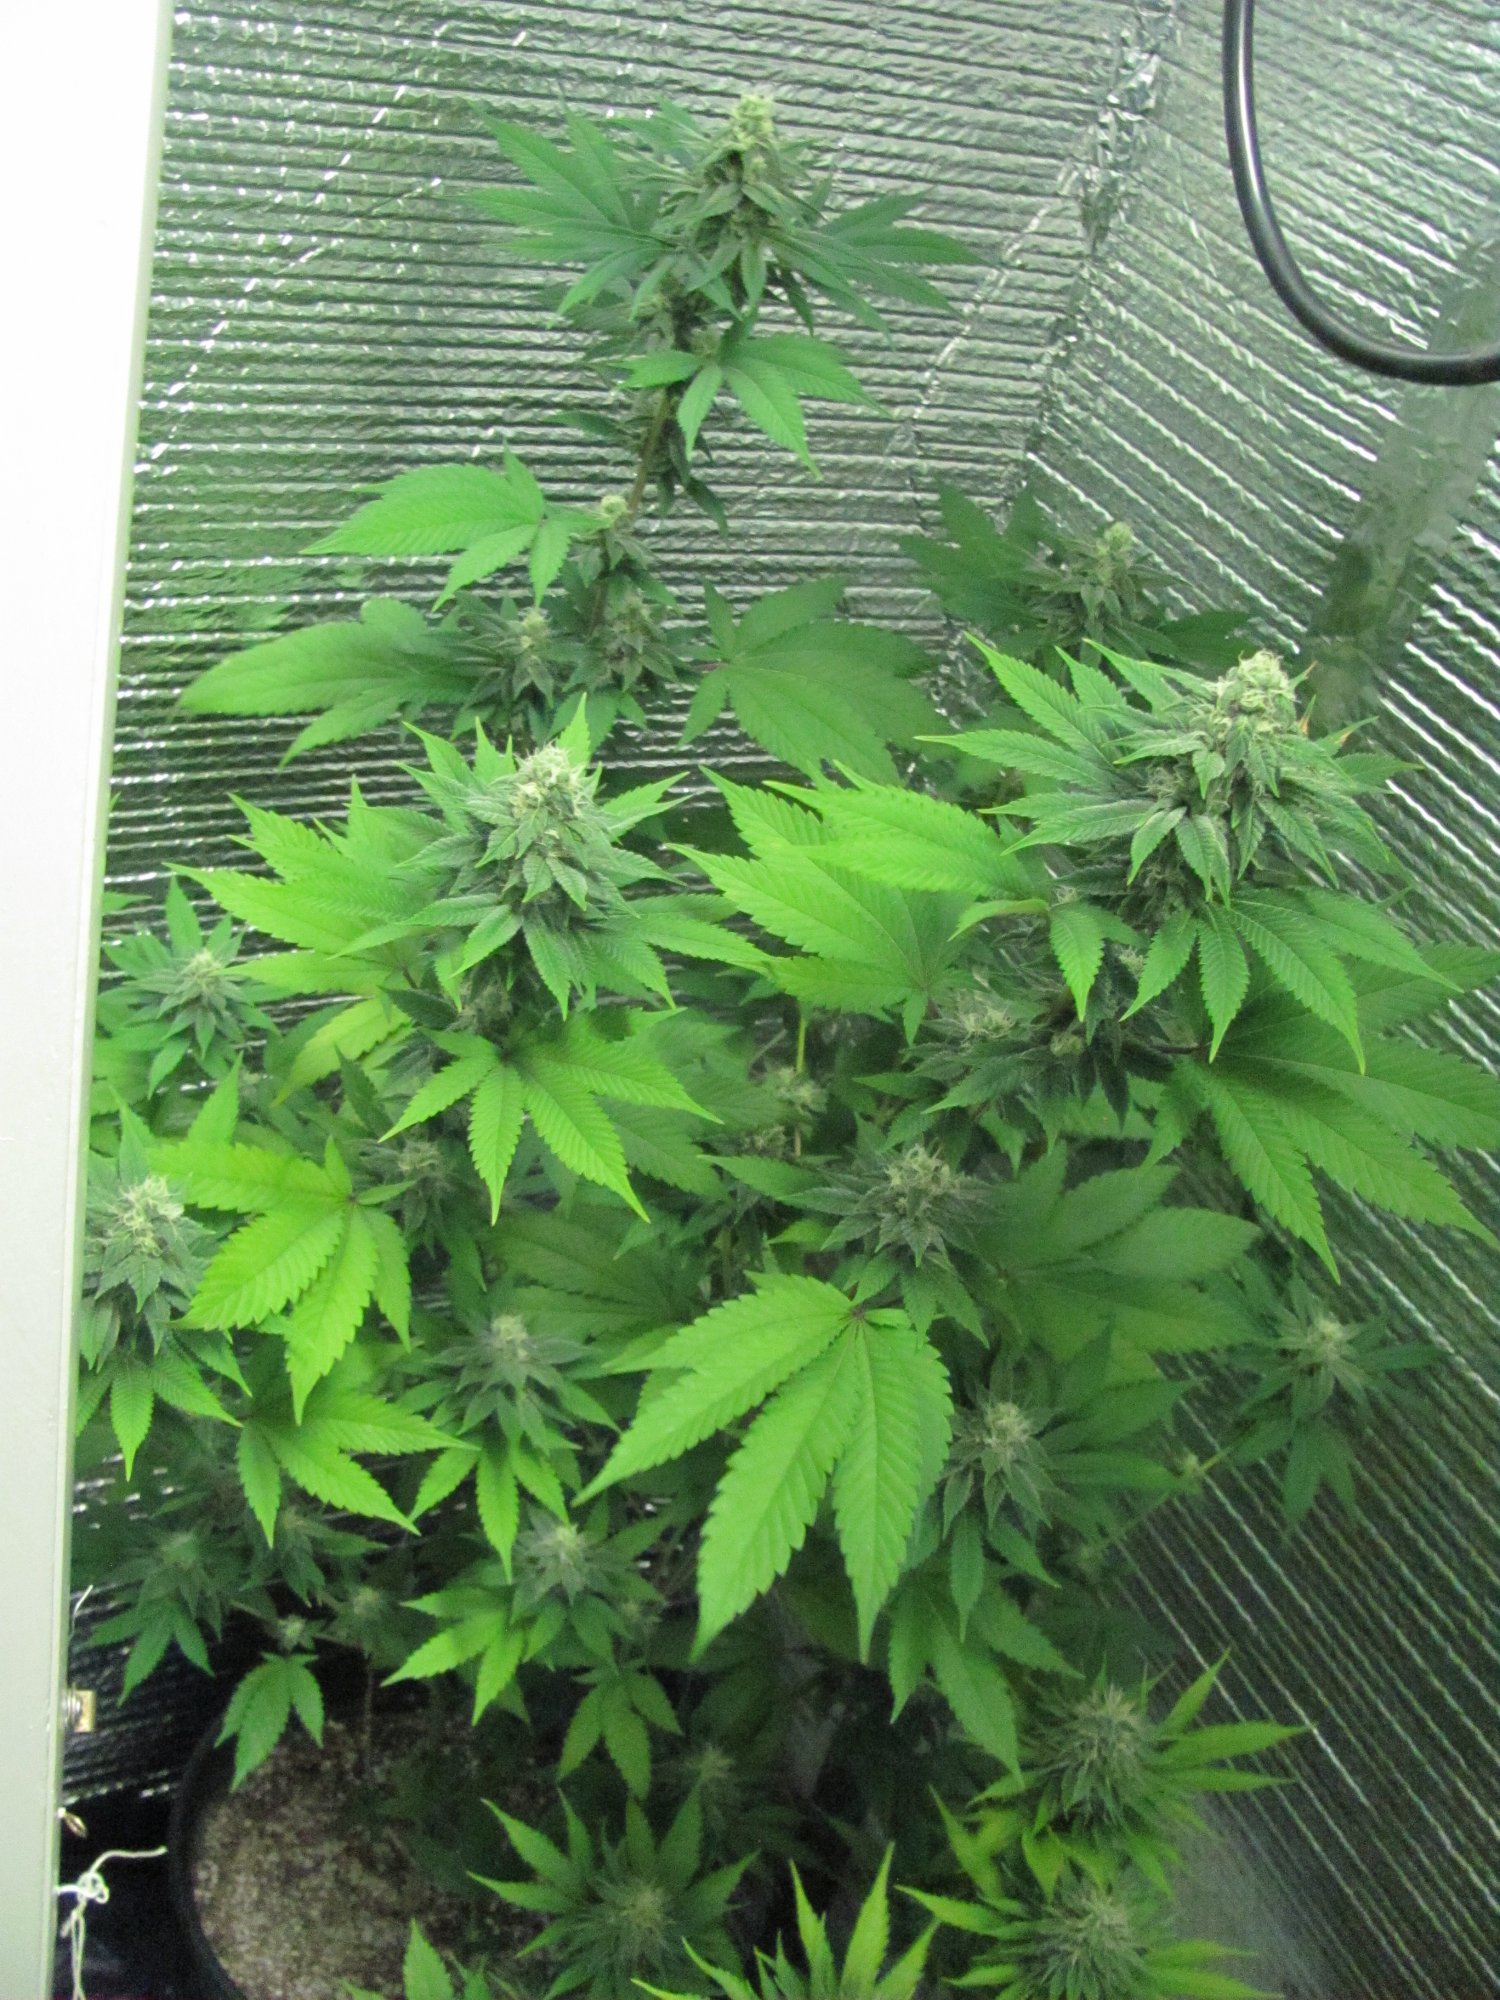 Blue cheese at 31 days of flowering